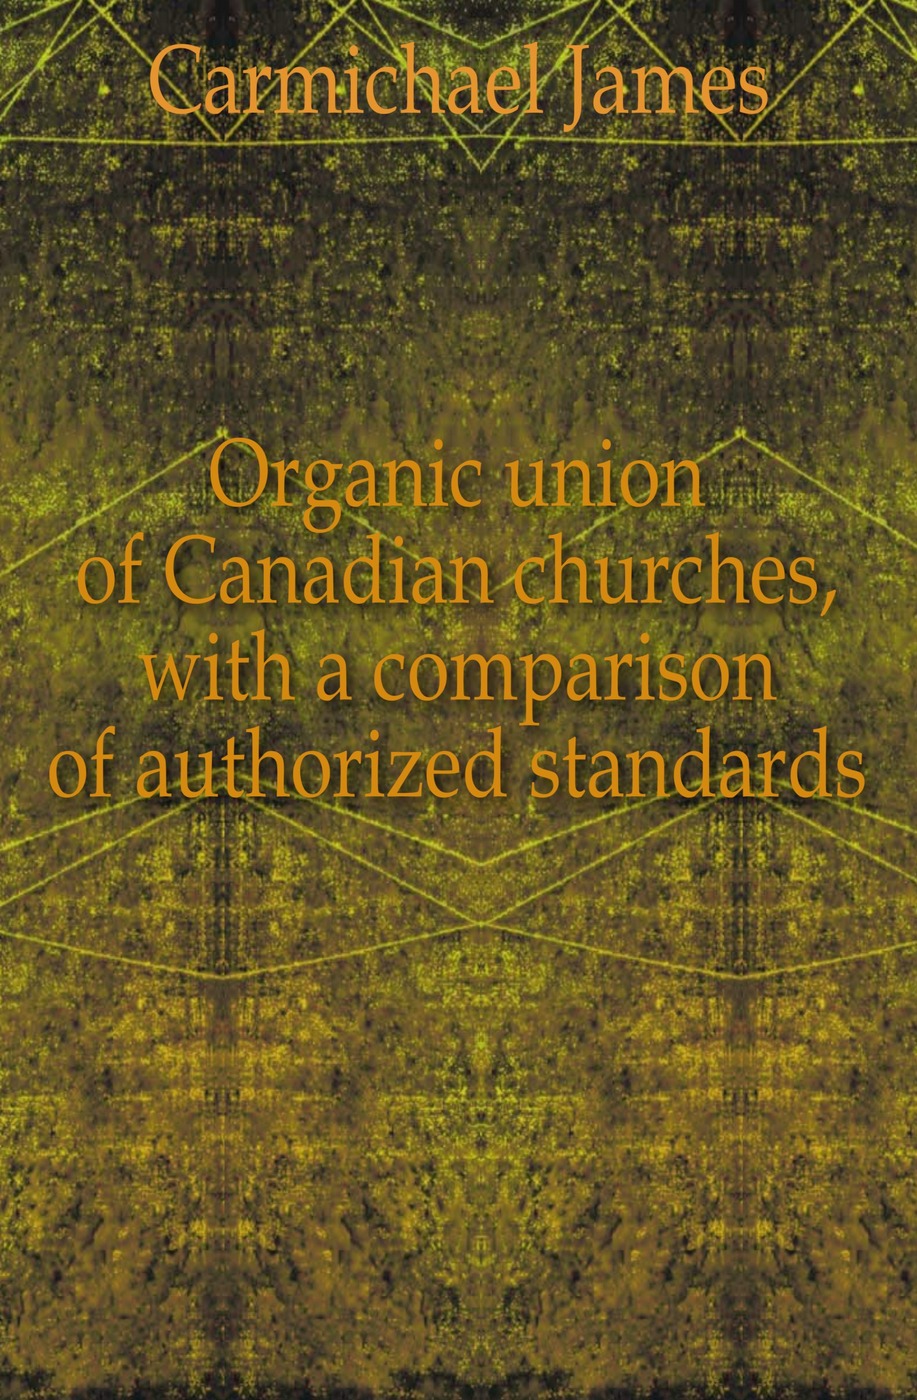 Organic union of Canadian churches, with a comparison of authorized standards